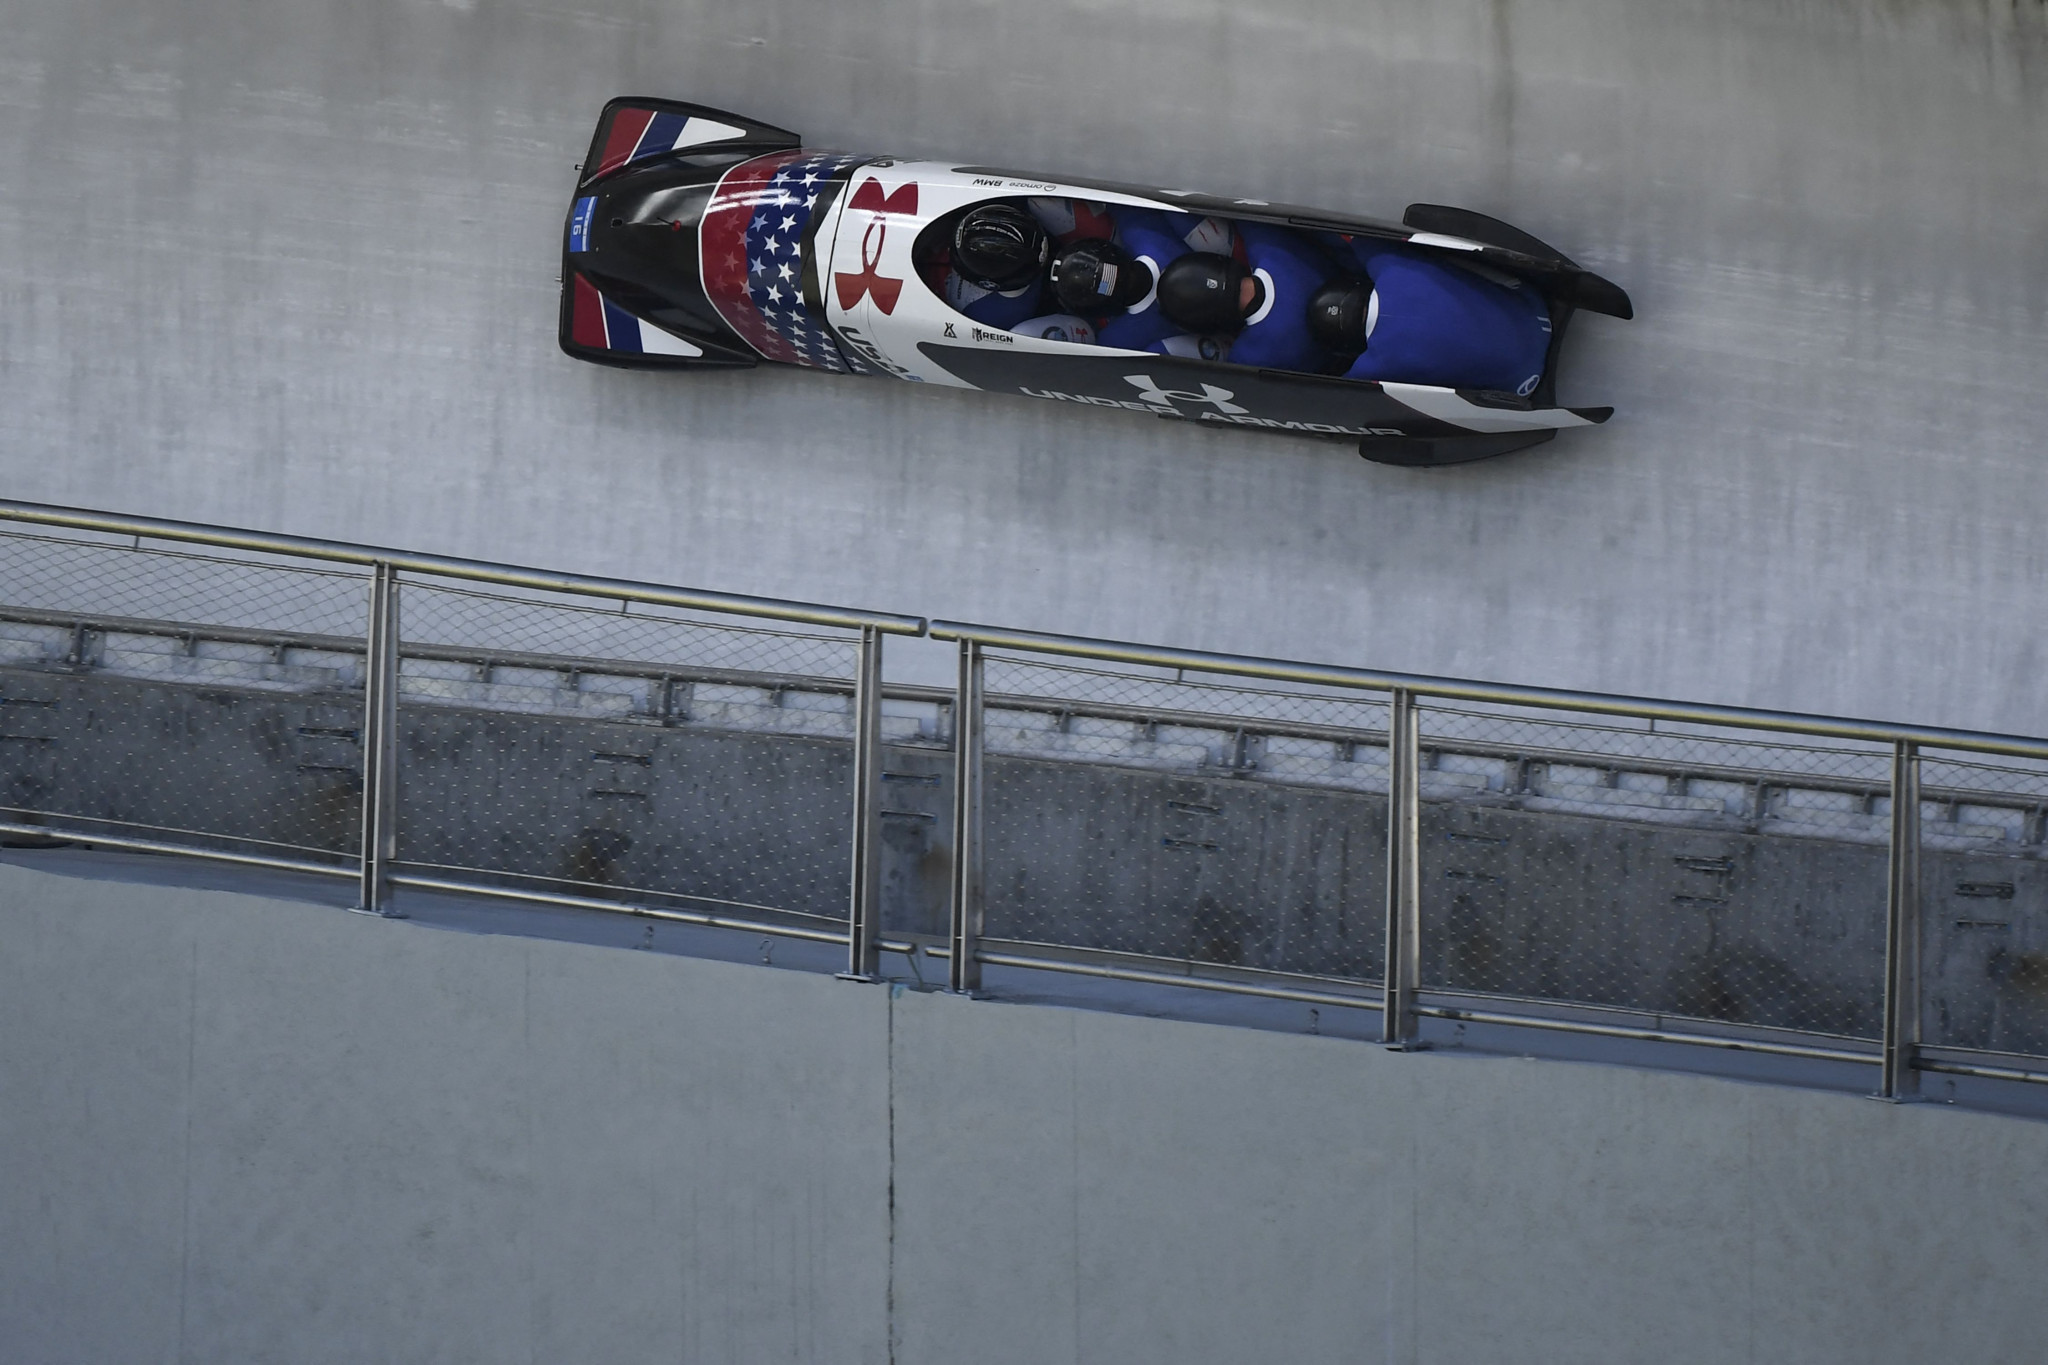 Kyle Wilcox was an alternate on the US bobsled team in Beijing ©Getty Images